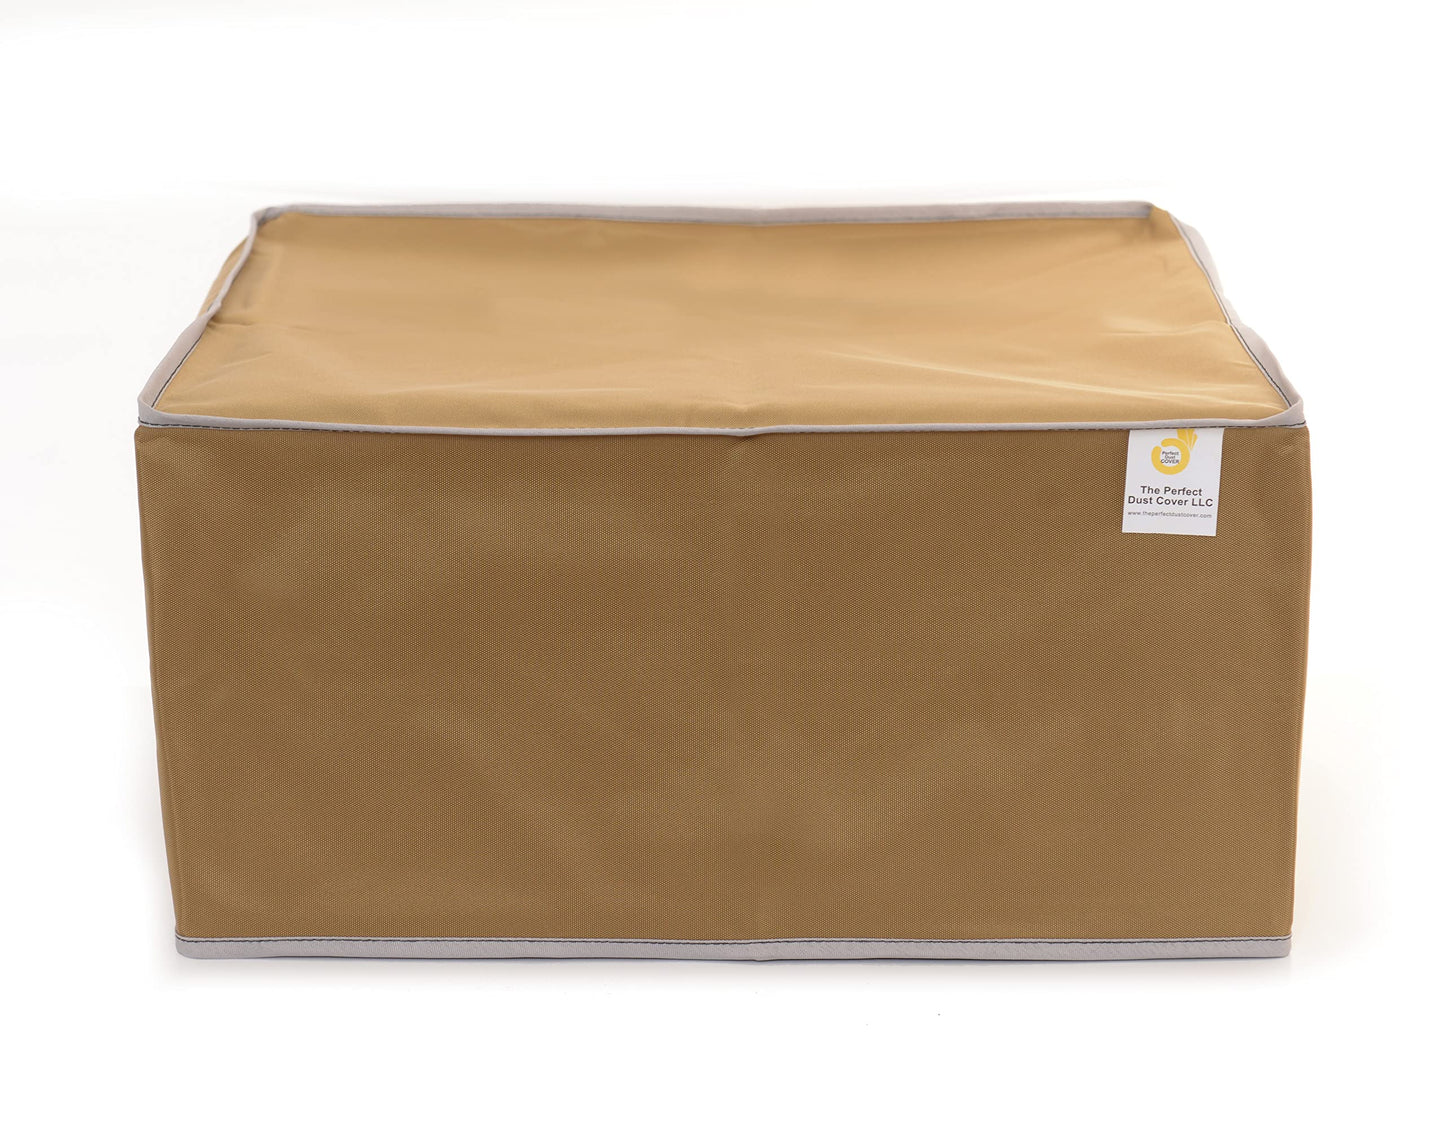 The Perfect Dust Cover, Tan Nylon Cover for Epson Expression Premium XP-7100 Small-in-One Printer, Anti Static, Waterproof Cover Dimensions 15.4''W x 13.3''D x 7.5''H by The Perfect Dust Cover LLC